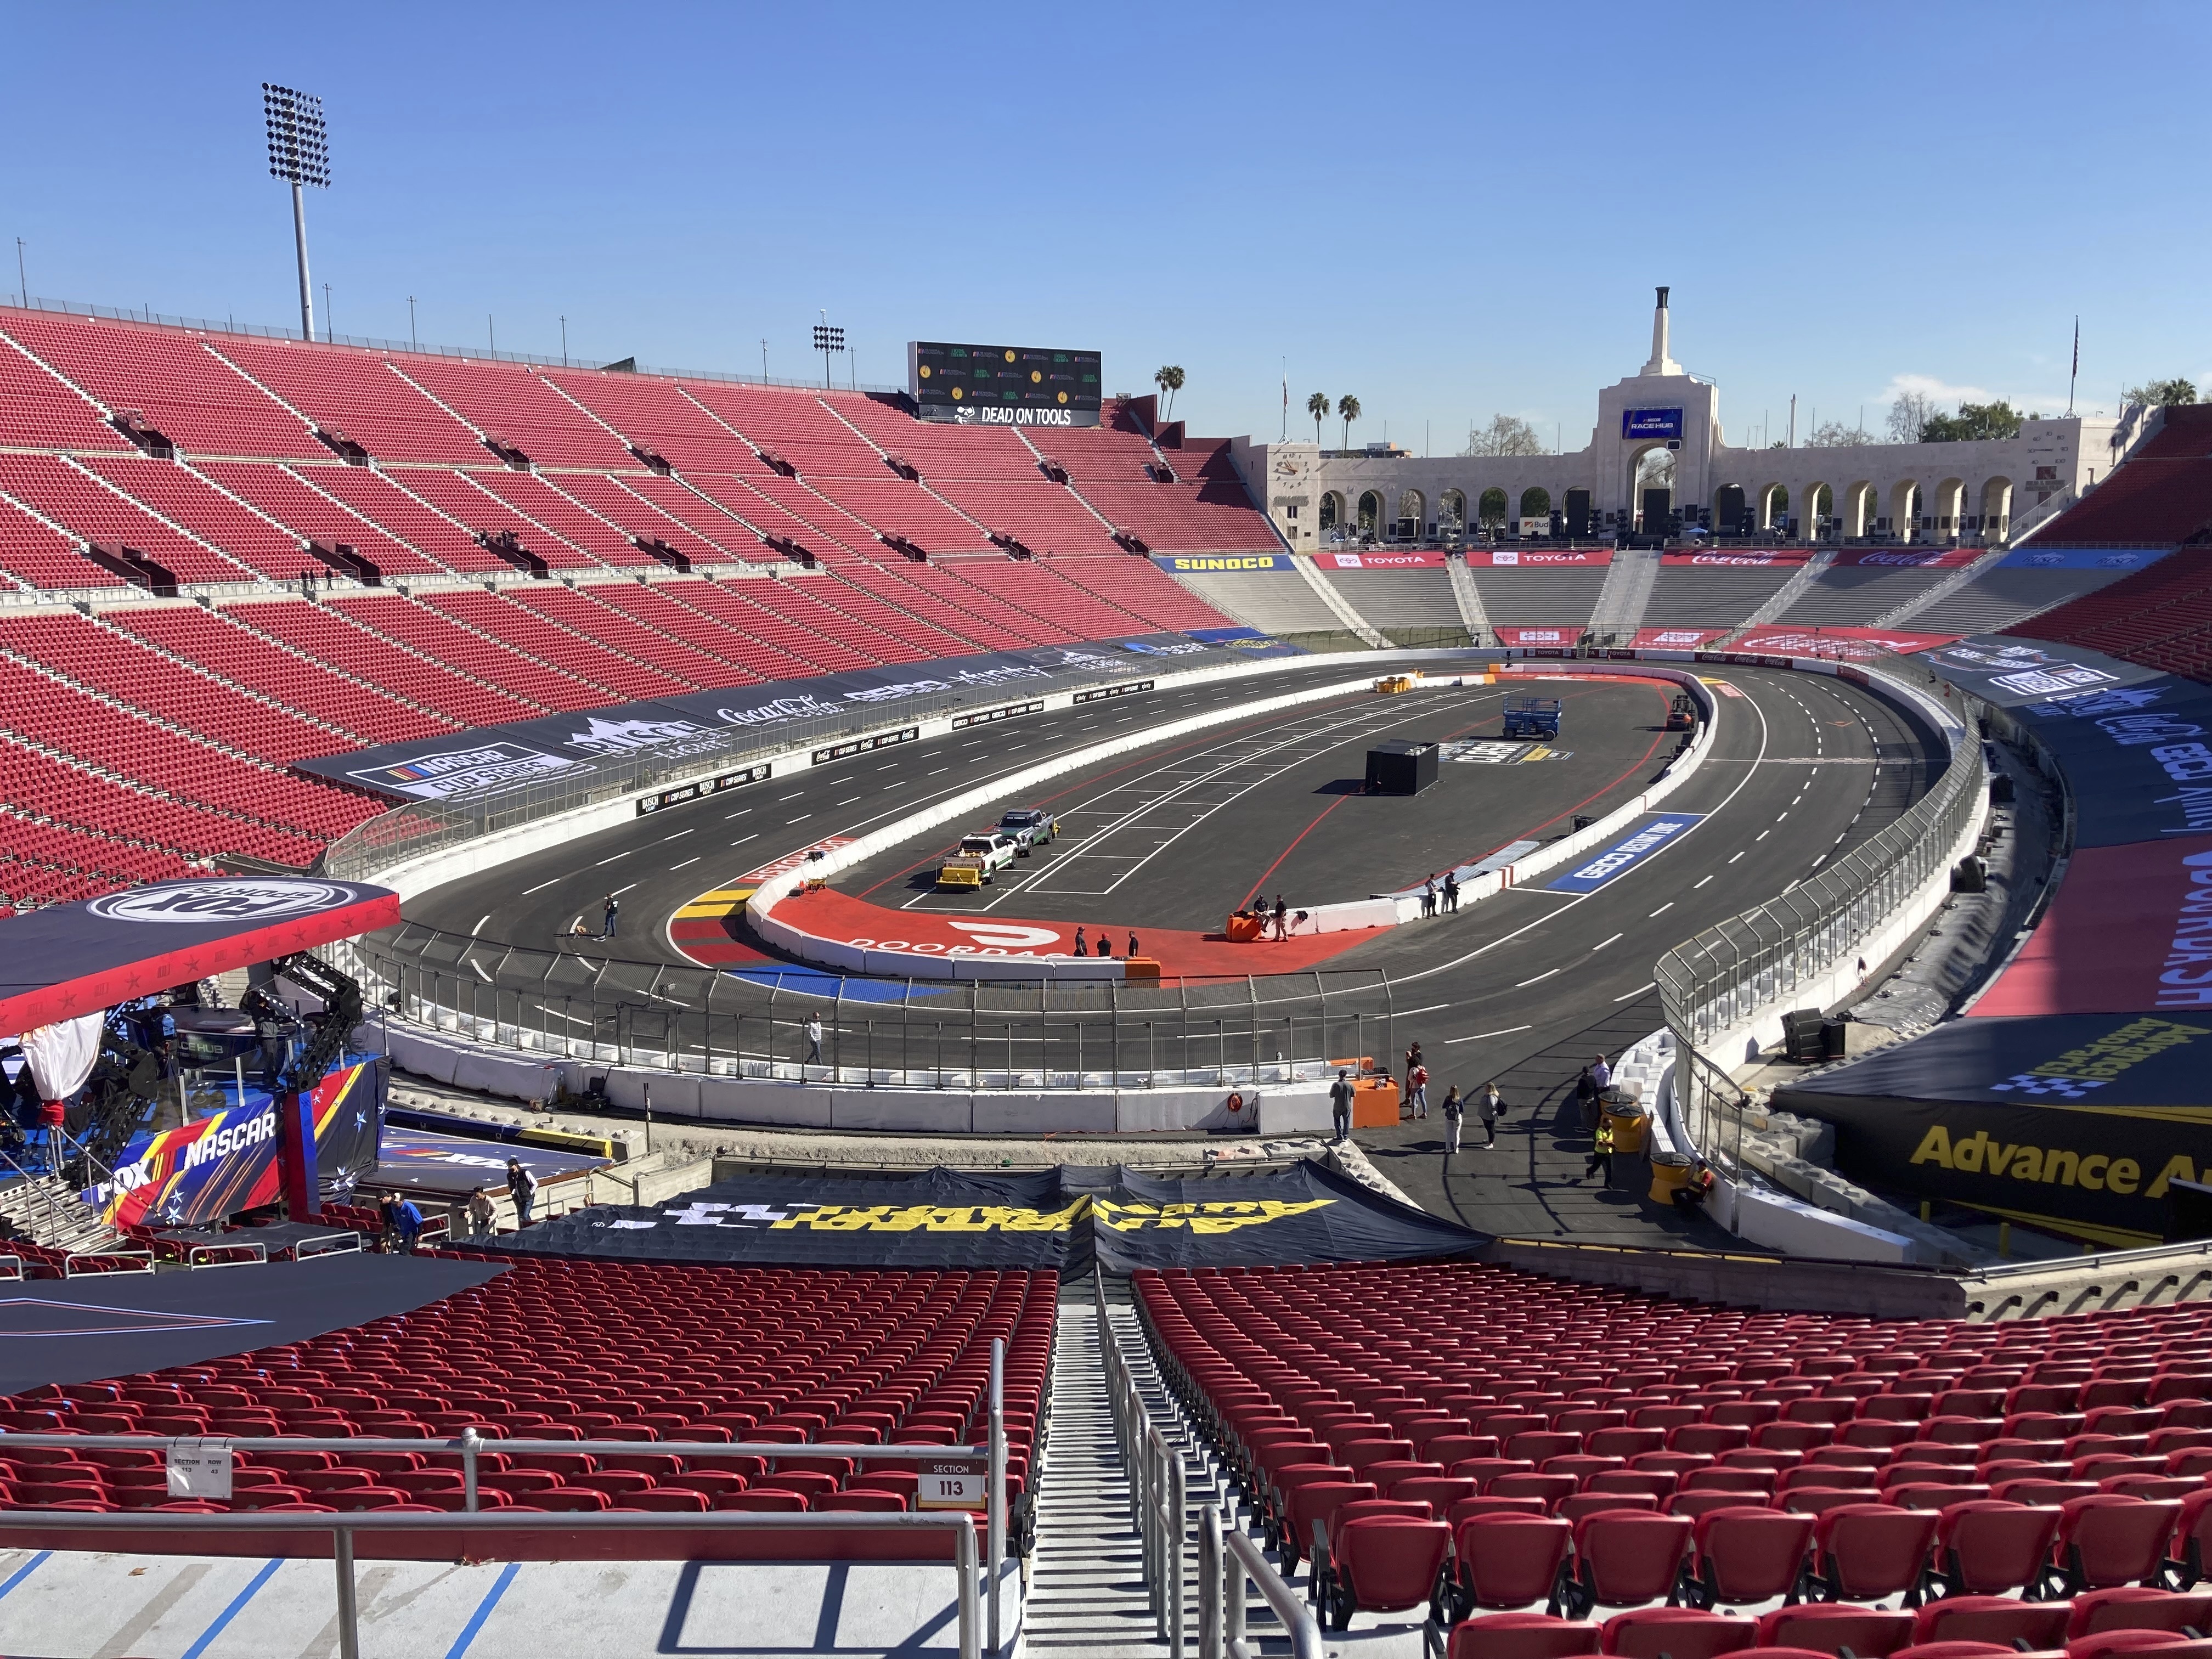 NASCAR bet more than $1 million to bring cars into Coliseum